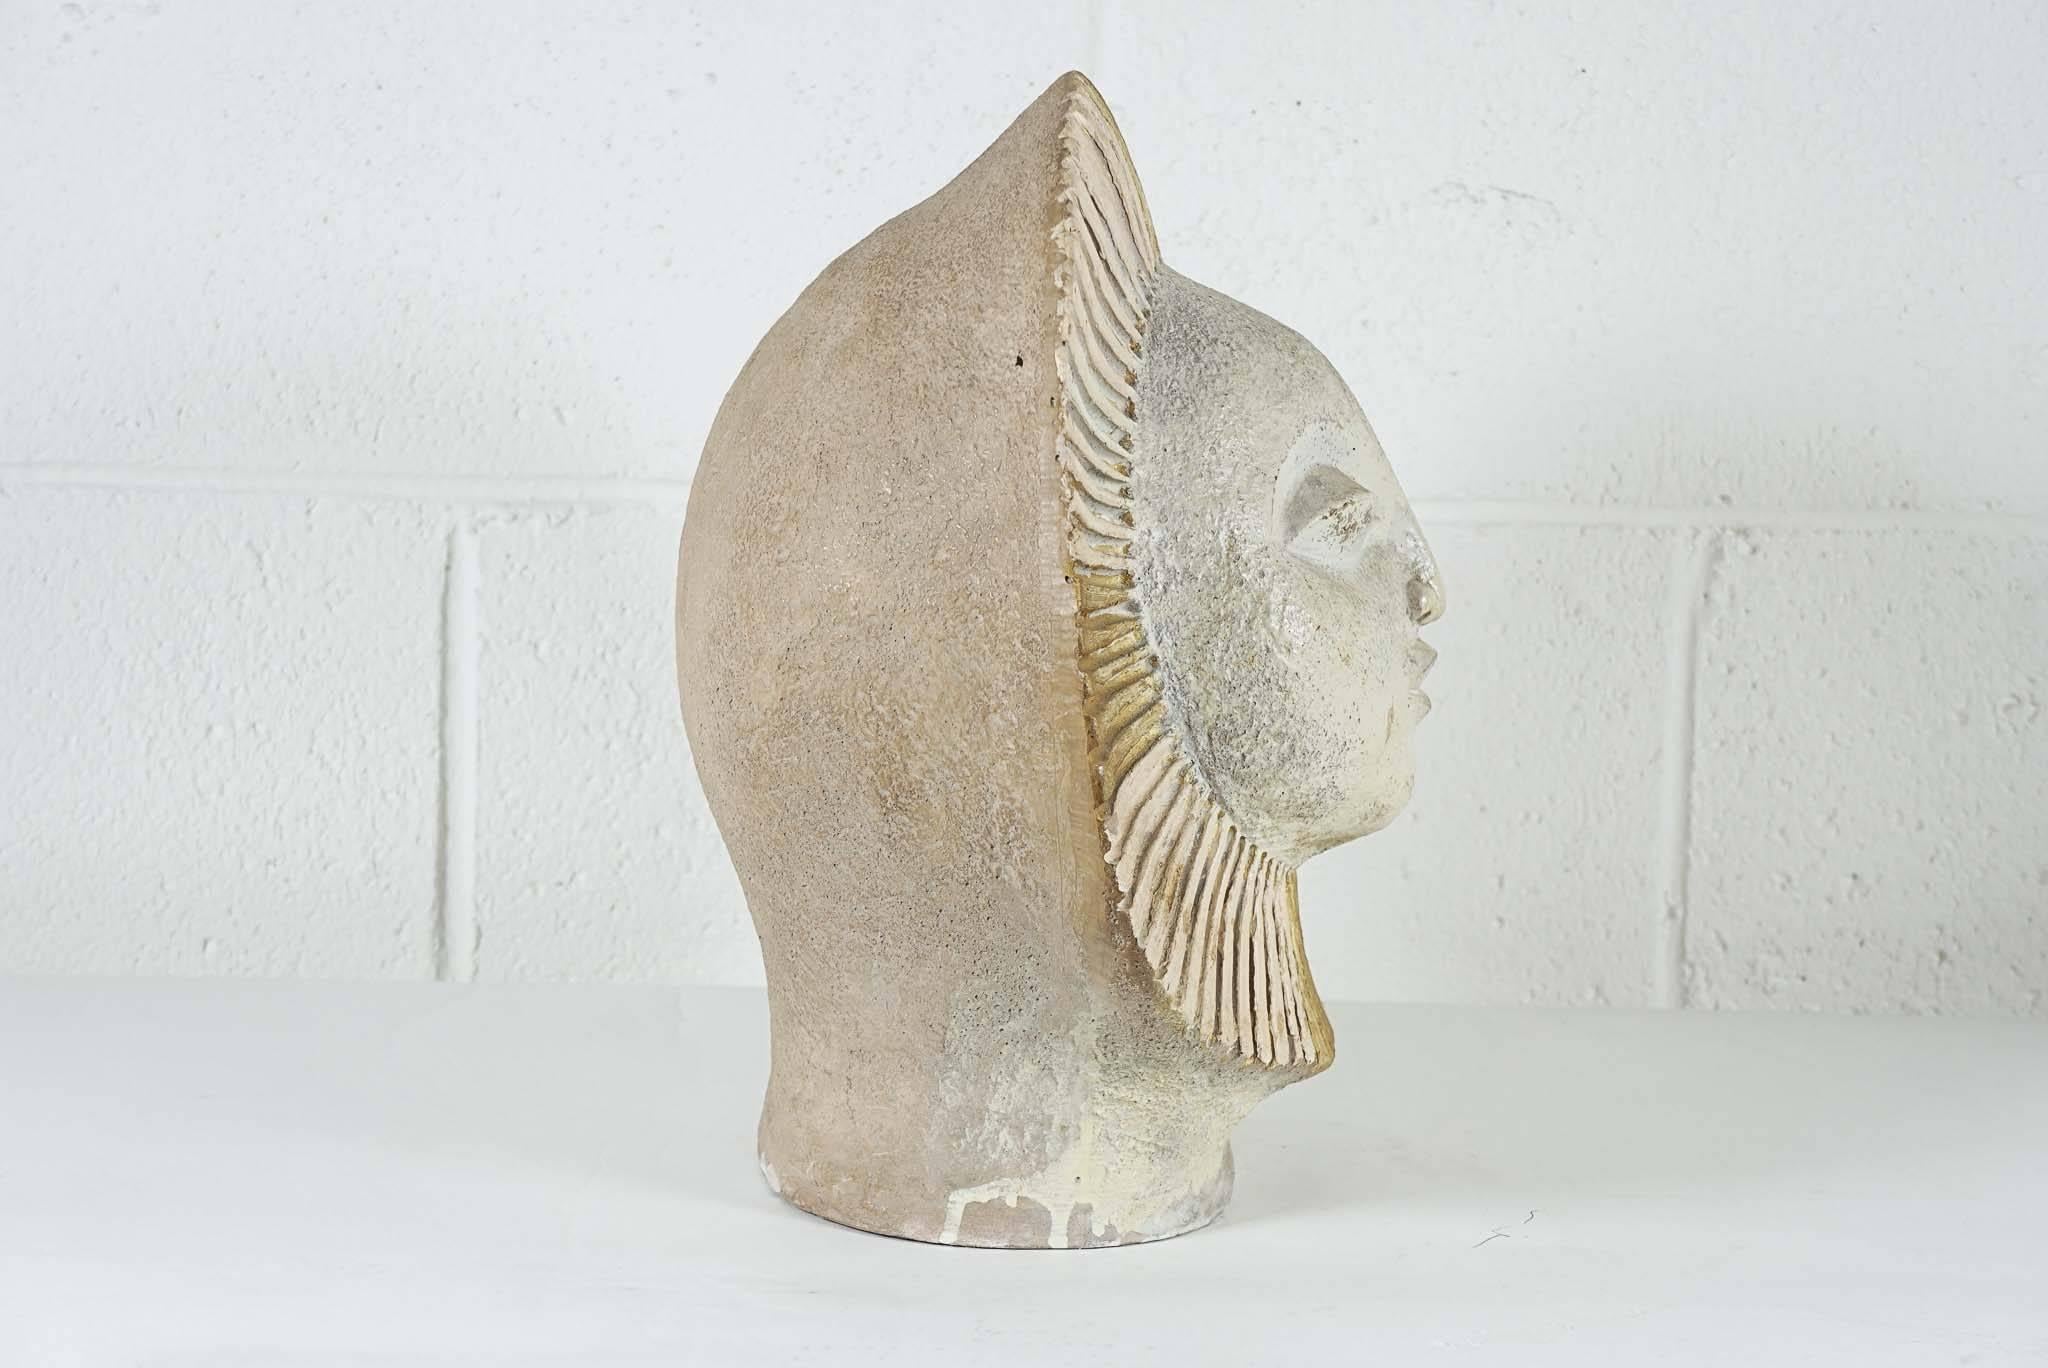 Sun Face Ceramic Sculpture by Paul Ballardo In Excellent Condition For Sale In Hudson, NY